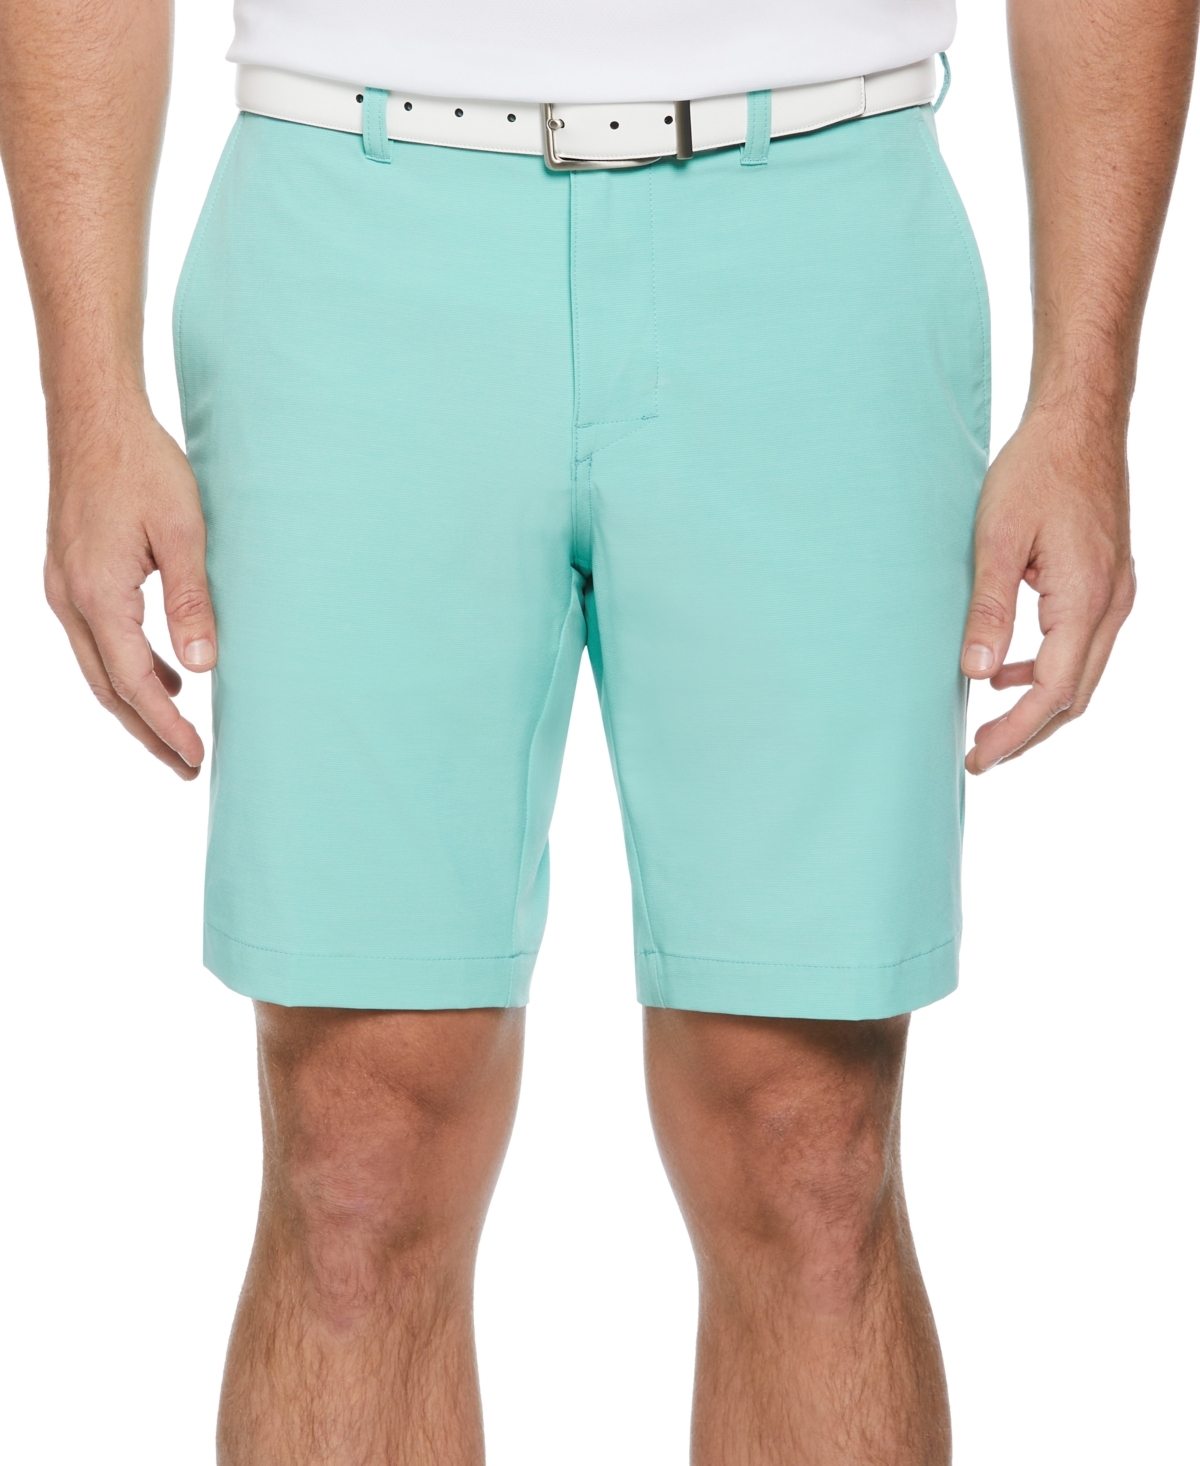 Men's Flat-Front 4-Way Stretch 9" Shorts - Cockatoo Heather